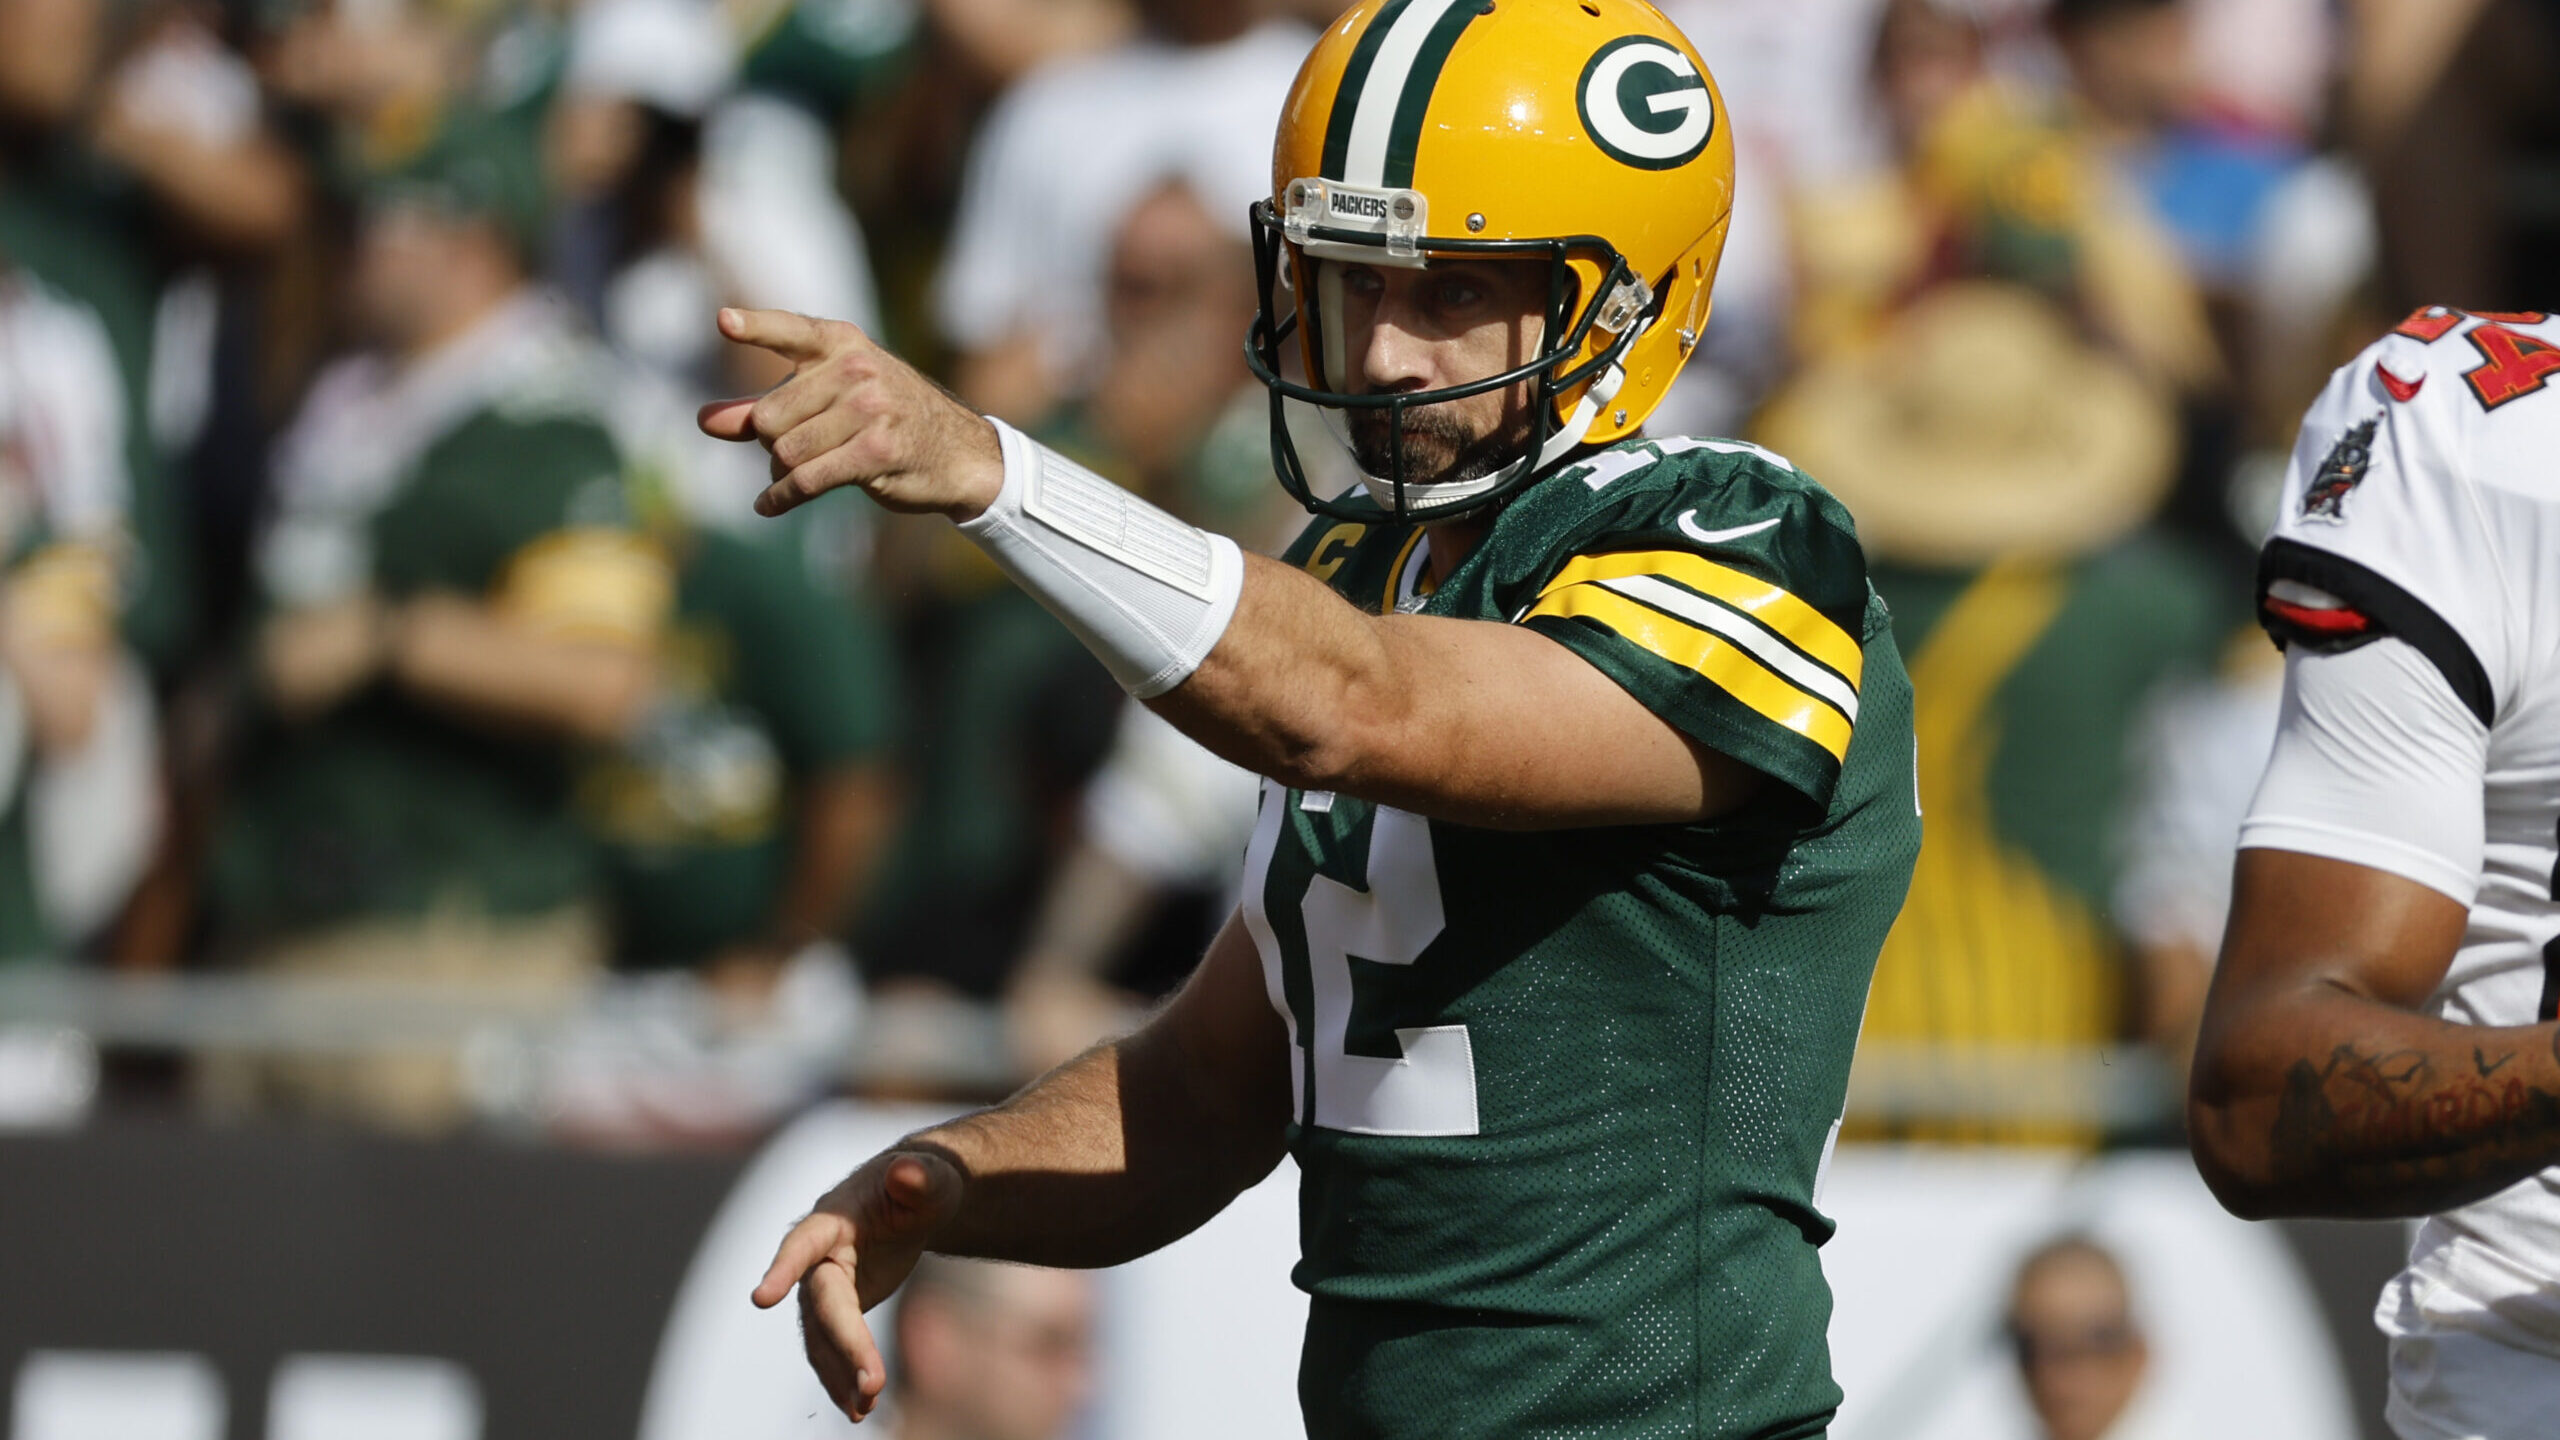 Packers Quarterback Aaron Rodgers